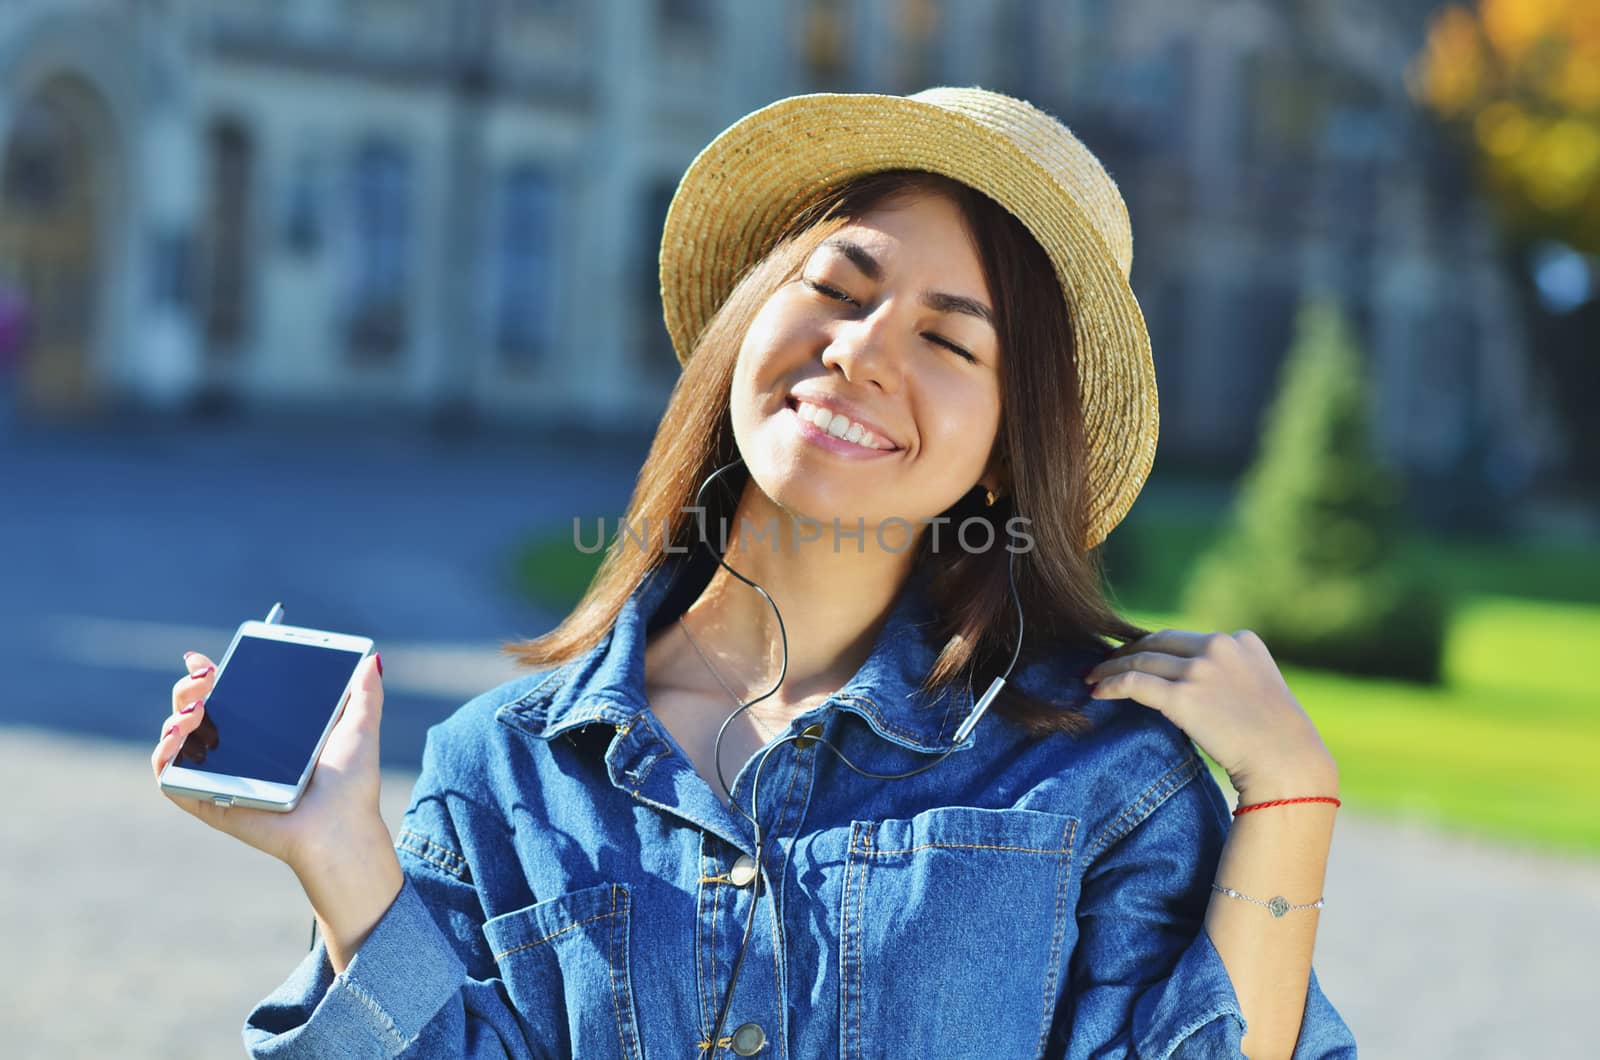 A young girl of Asian appearance enjoys life and listens to music raising her head up and smiling with her eyes closed